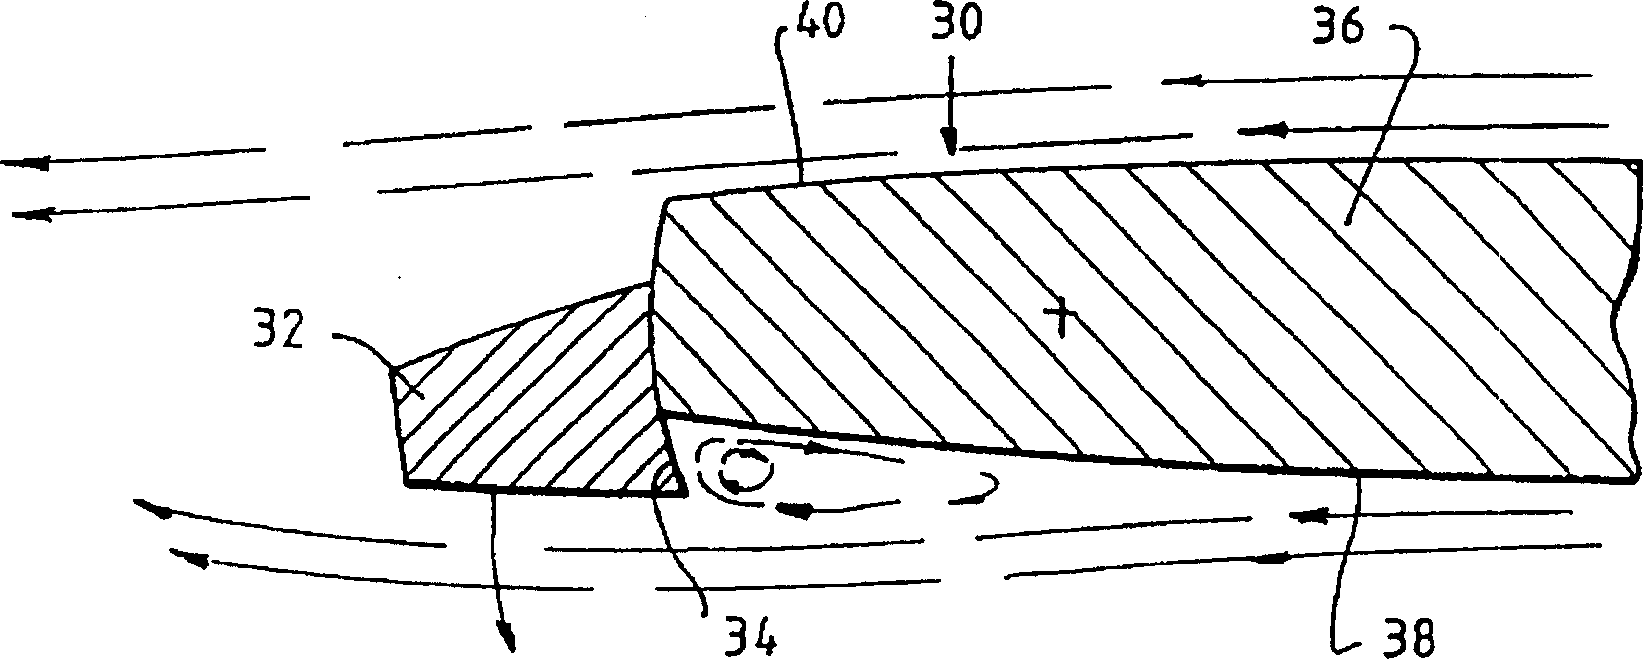 Improved hydrofoil device